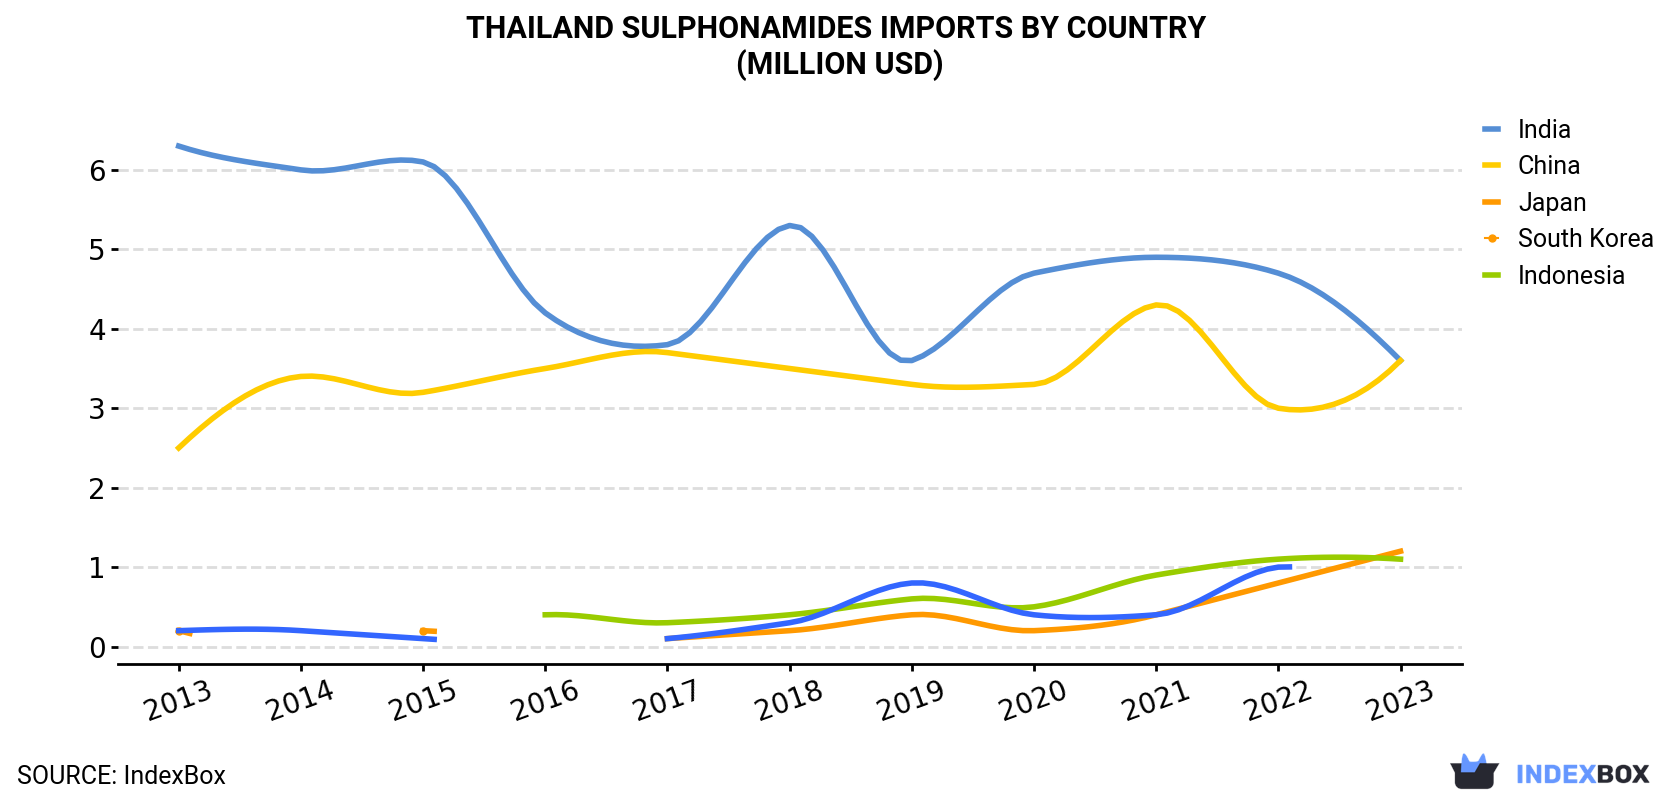 Thailand Sulphonamides Imports By Country (Million USD)